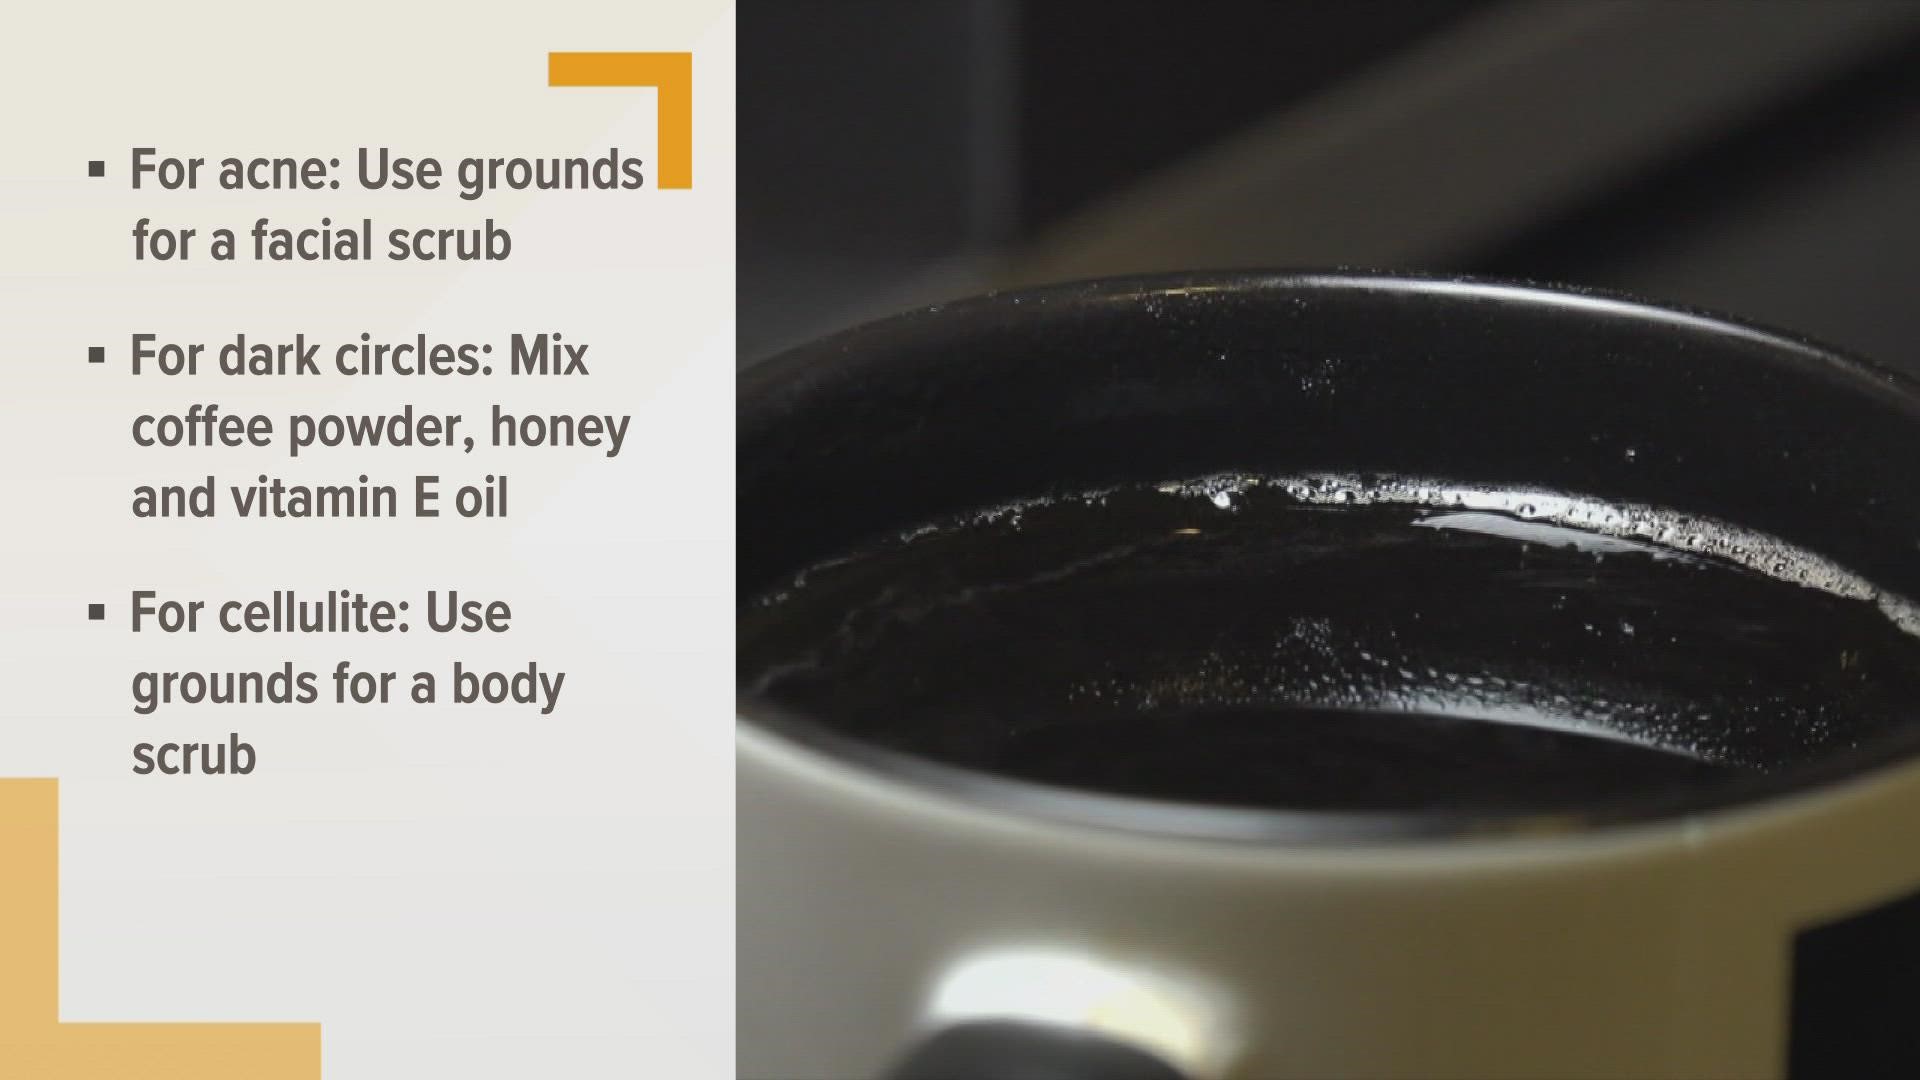 The antioxidants and stimulants found in coffee have been linked to improving skin quality.